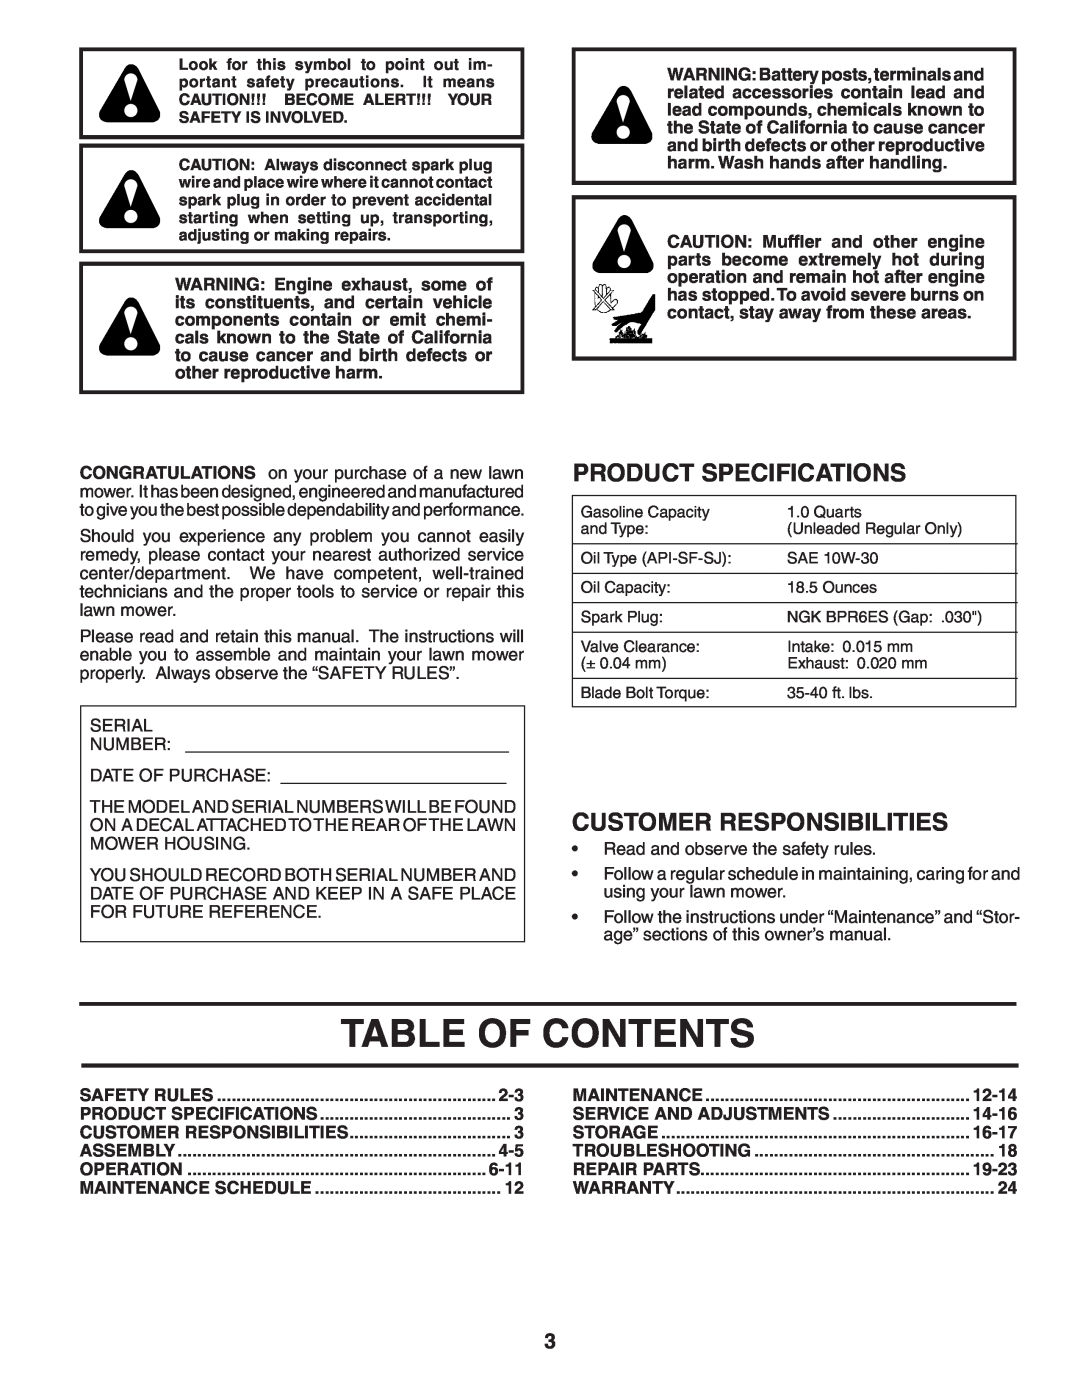 Husqvarna 55C21HV owner manual Table Of Contents, Product Specifications, Customer Responsibilities 